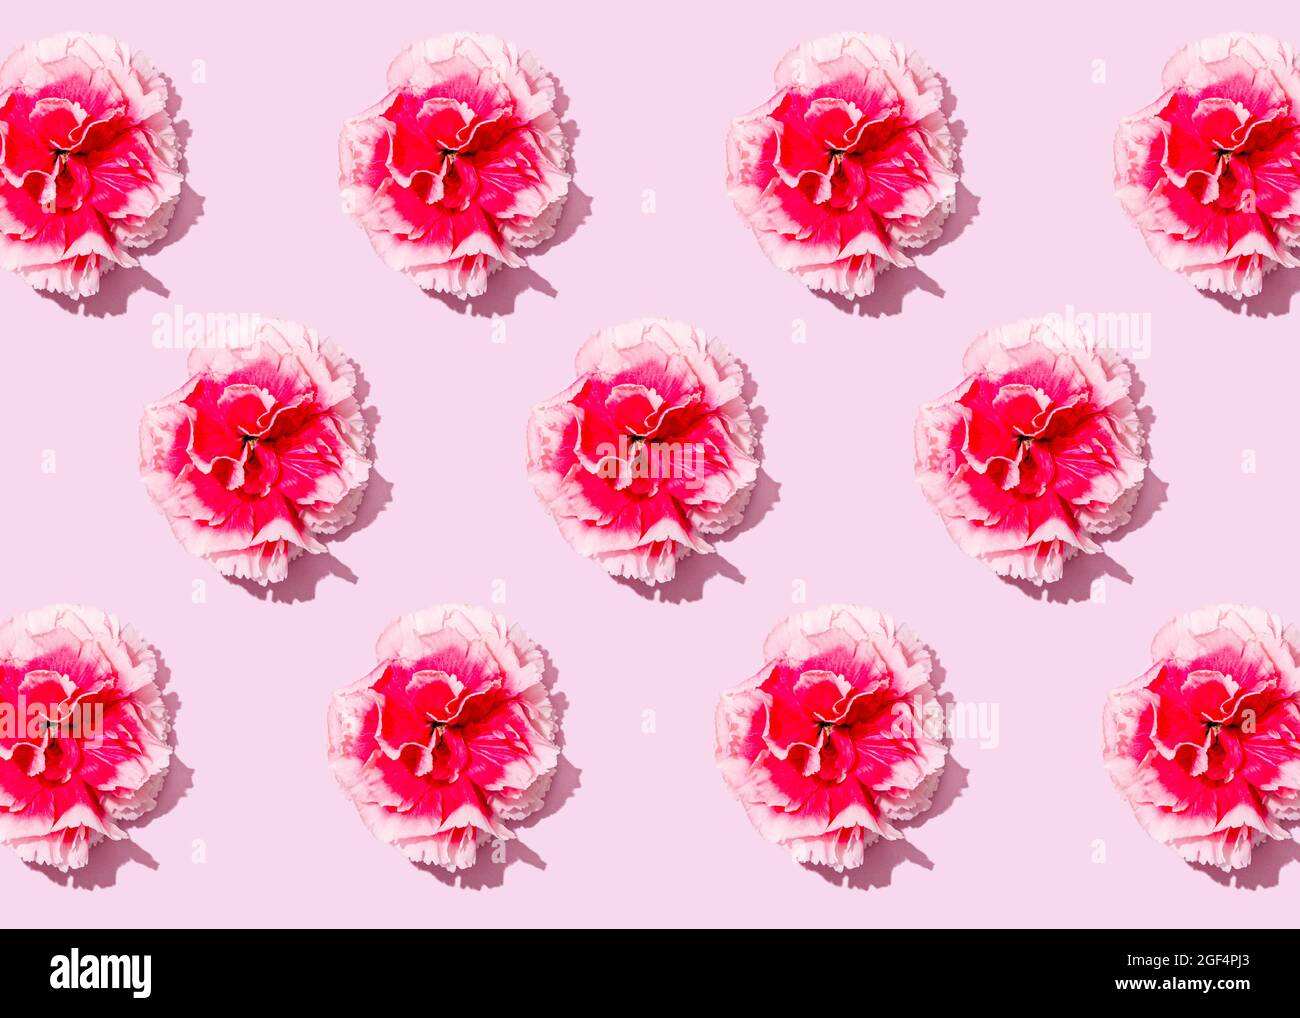 Pattern of heads of pink carnation flowers flat laid against pink background Stock Photo